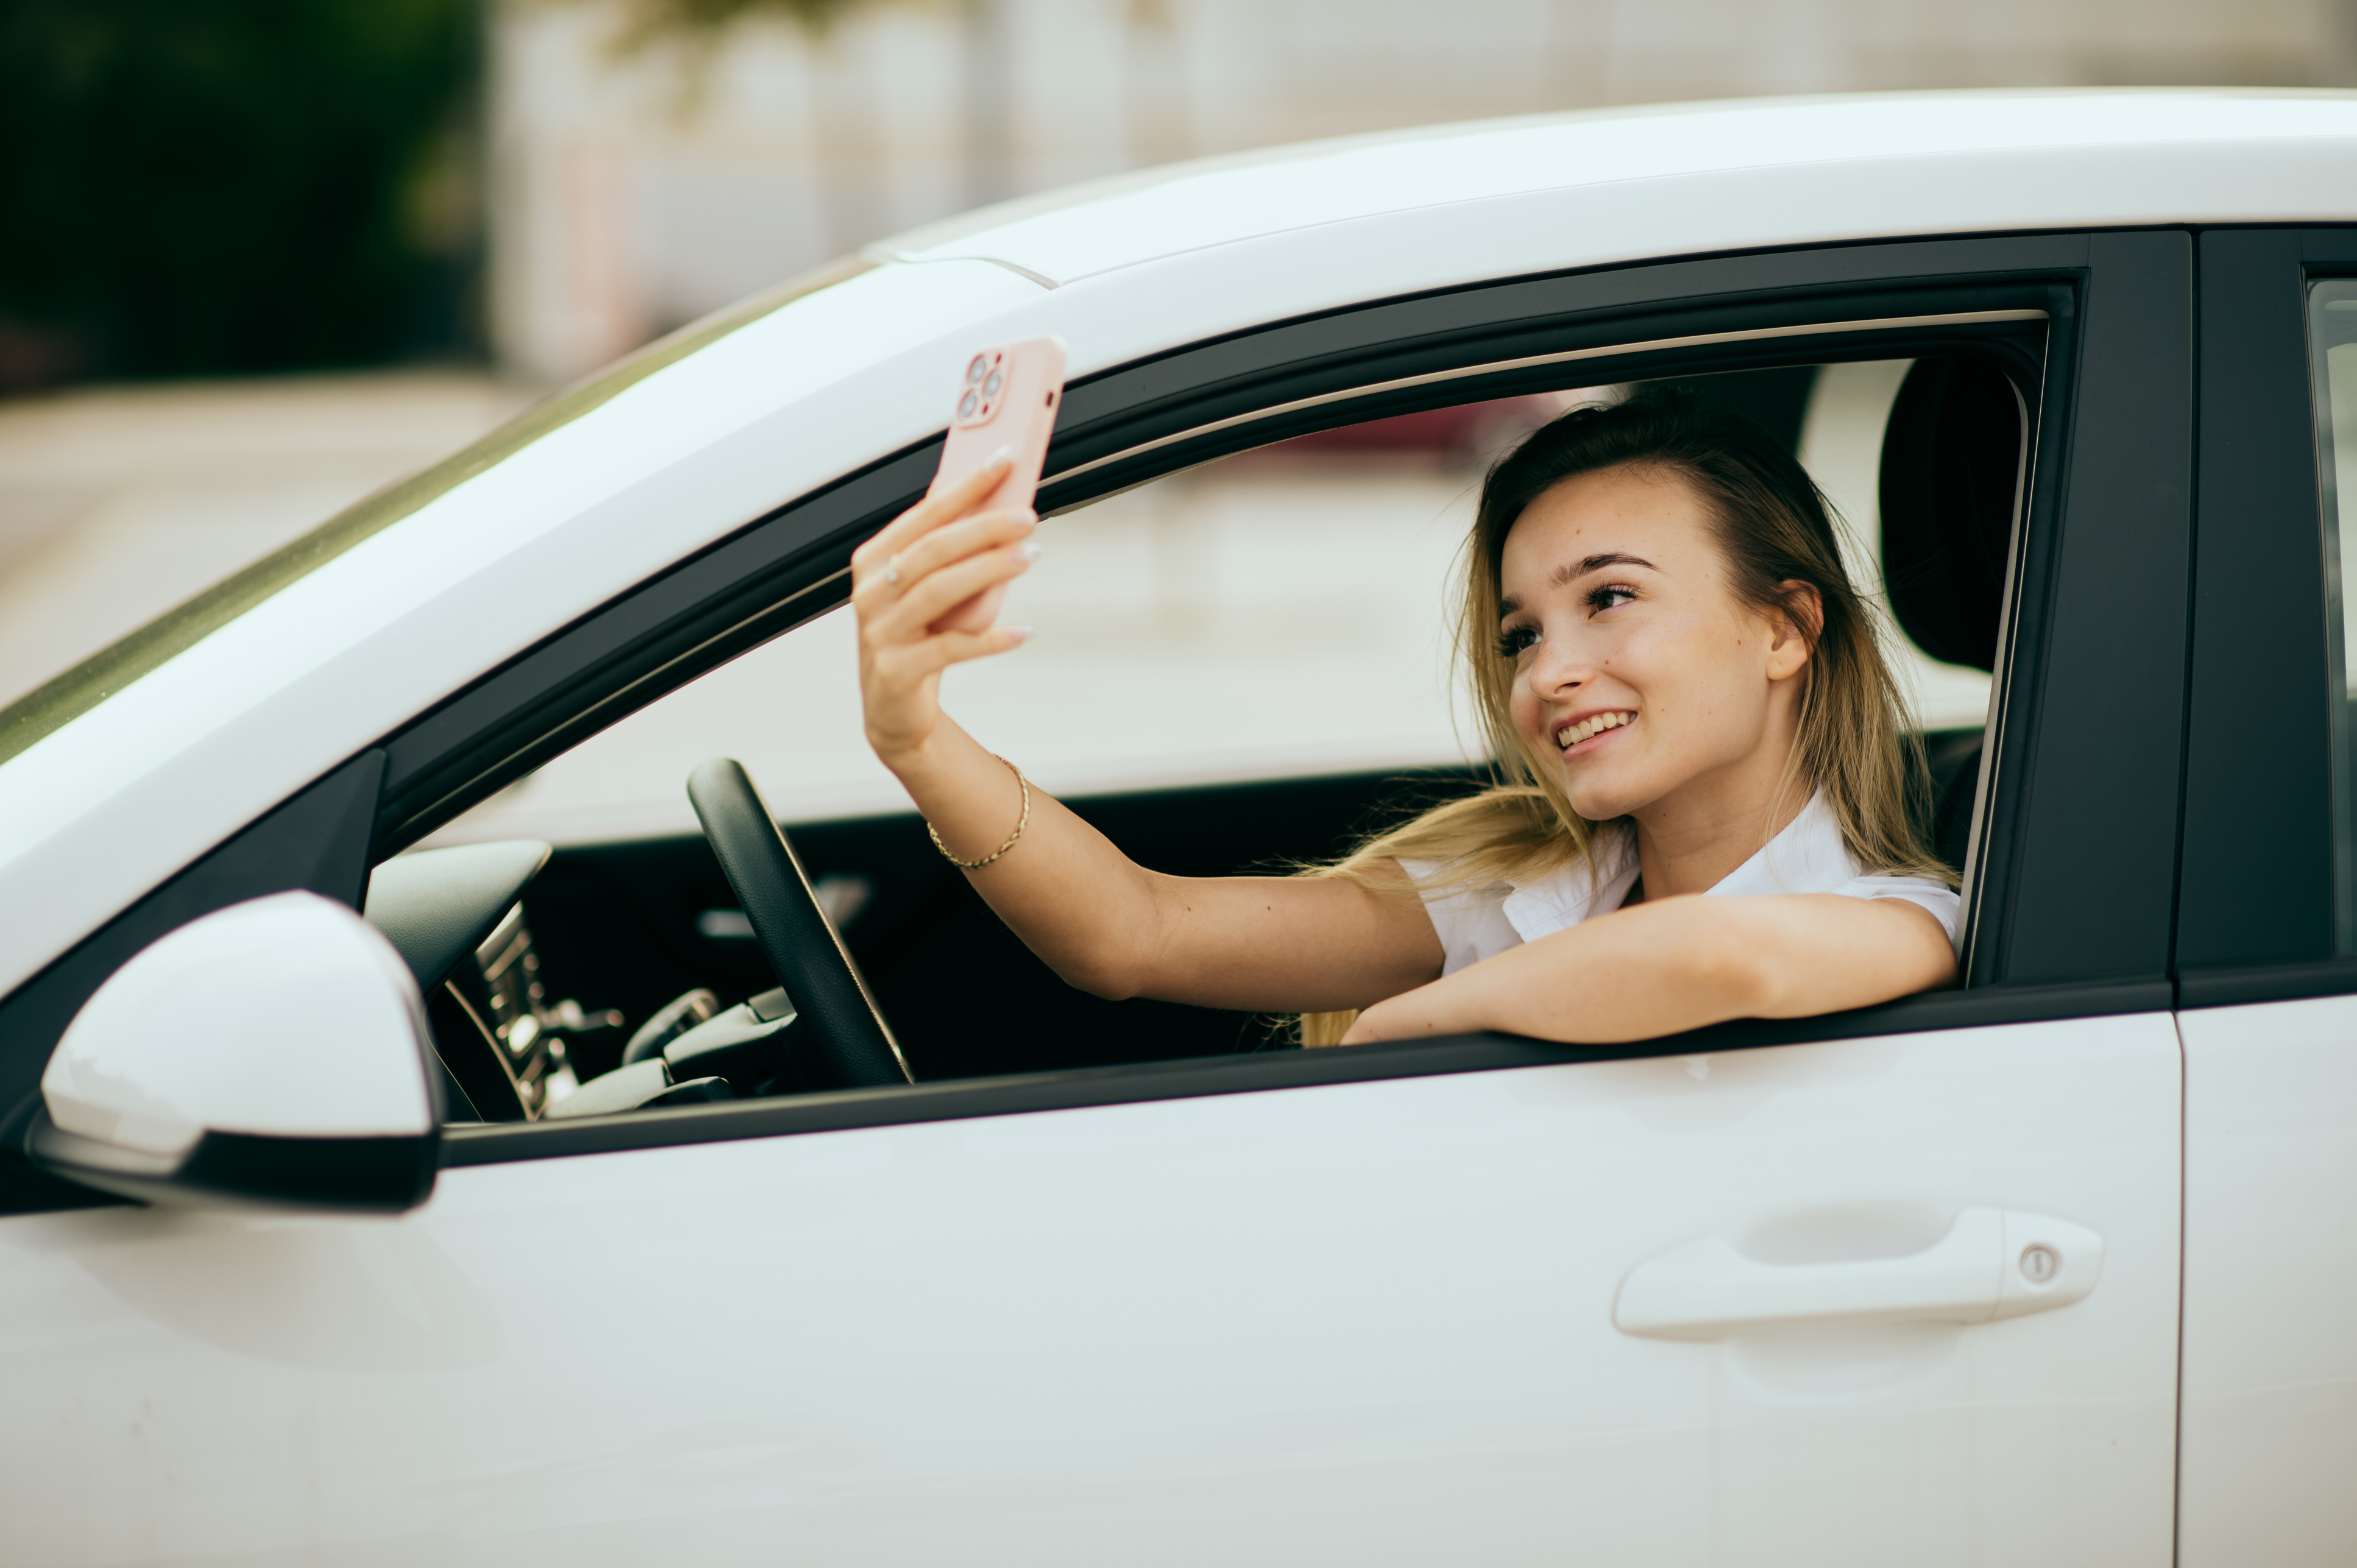 Online Dating: What's With Girls Taking Pictures In Their Cars?